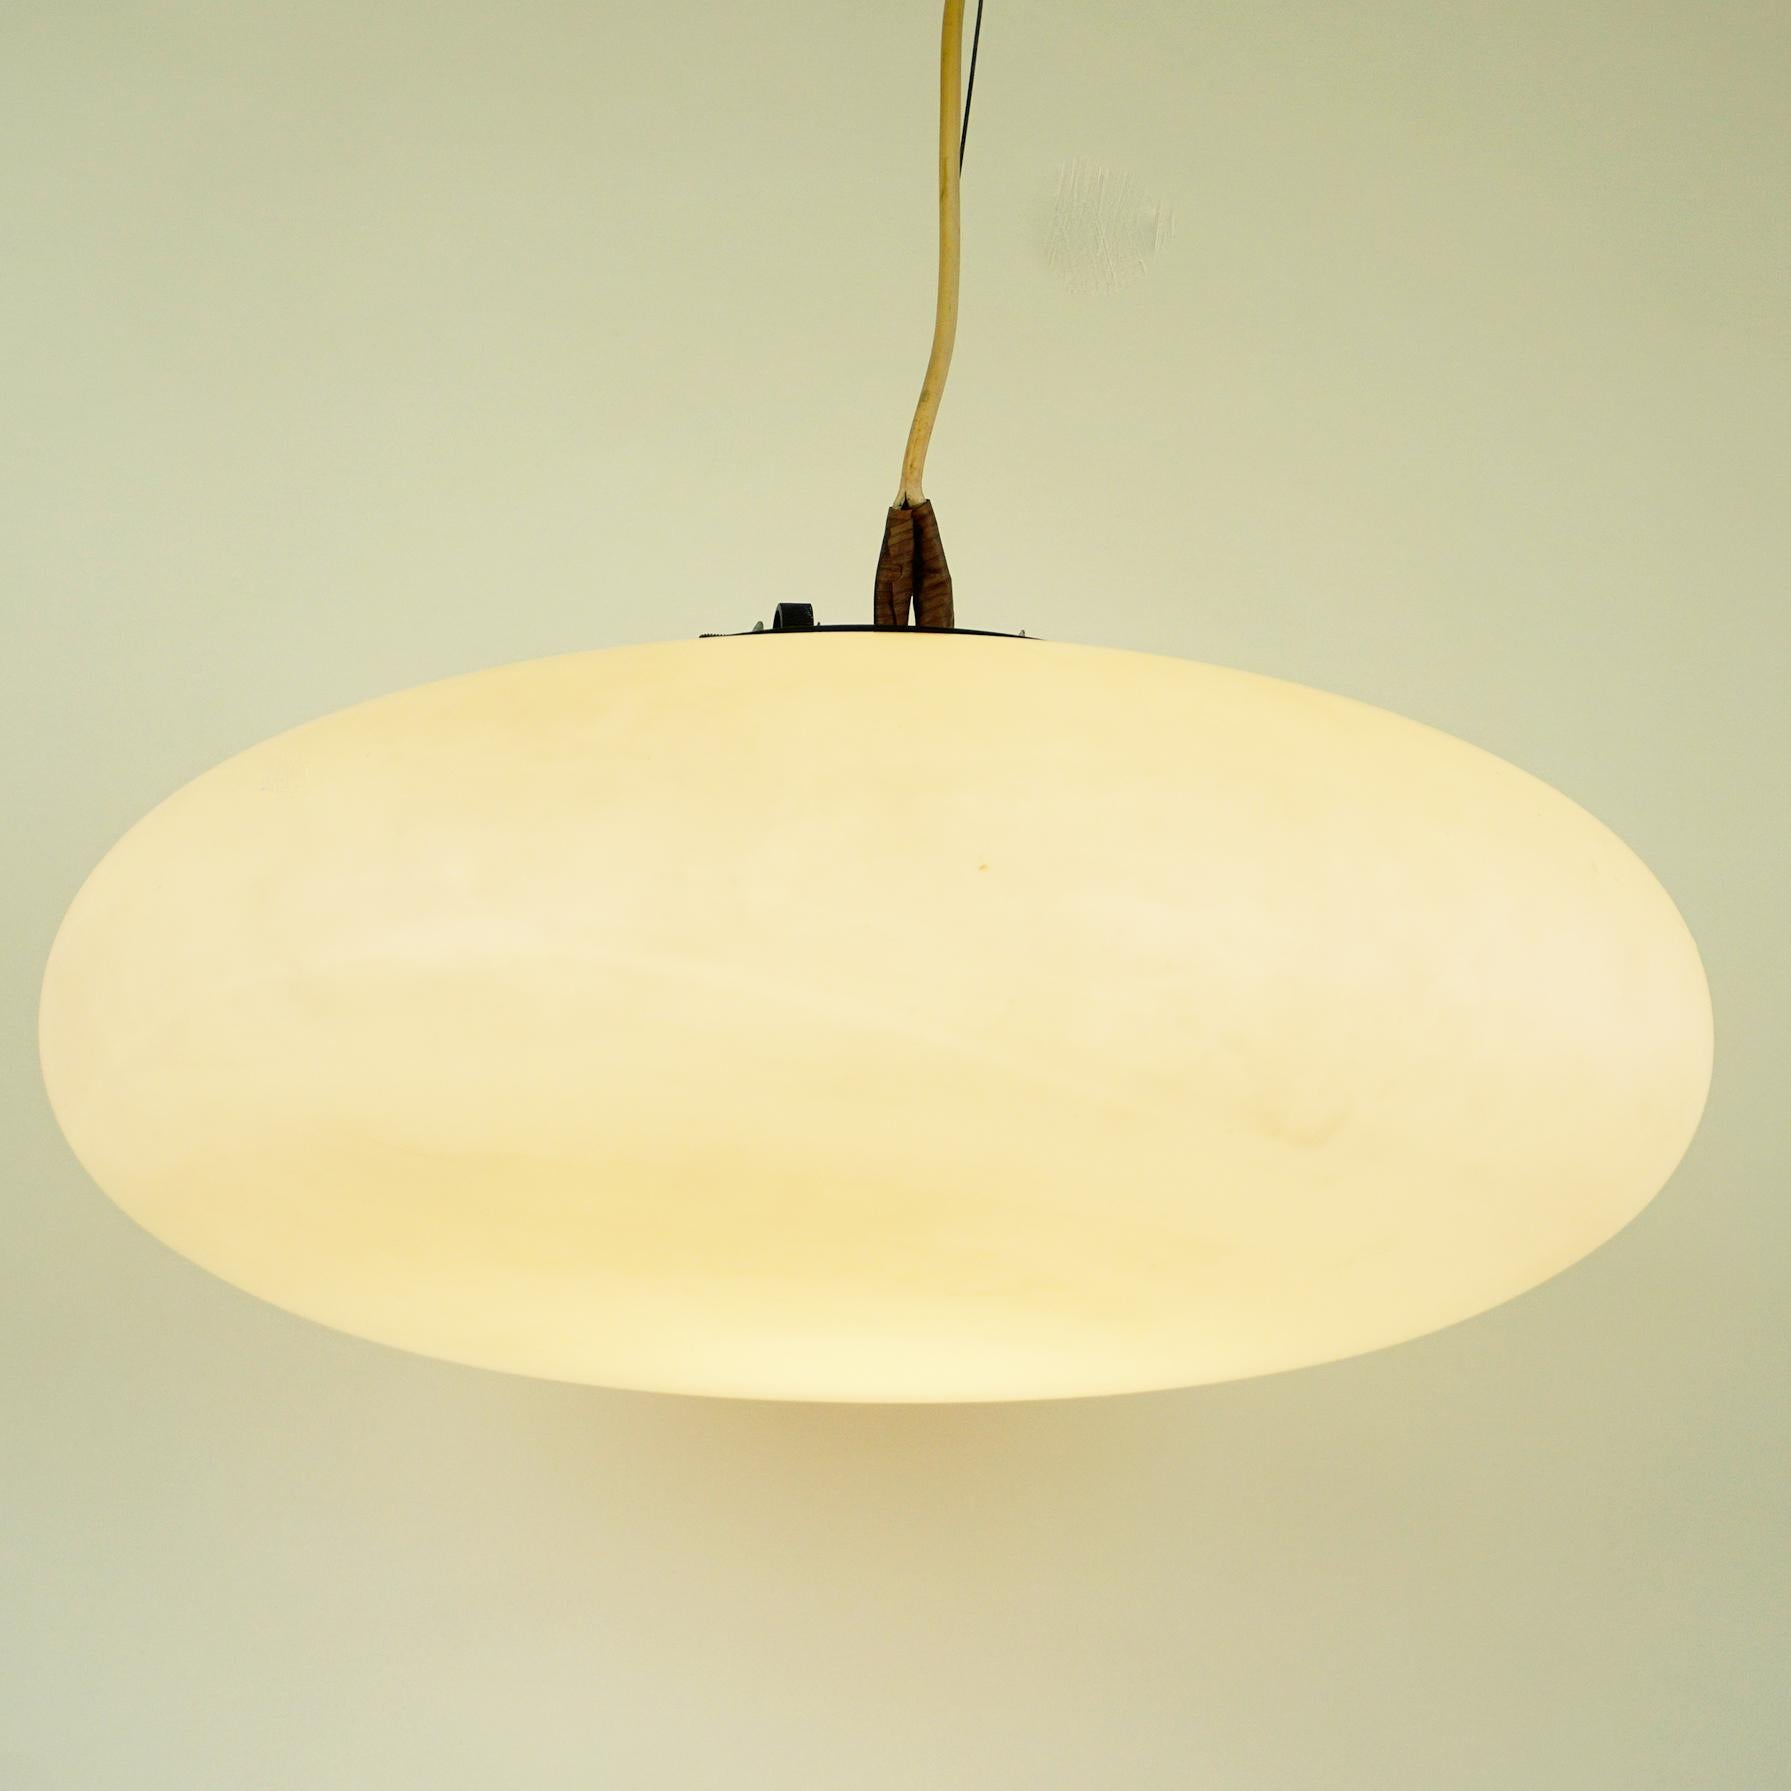 Lacquered Italian Midcentury Oval Opaline Glass Chandelier in the Style of Stilnovo